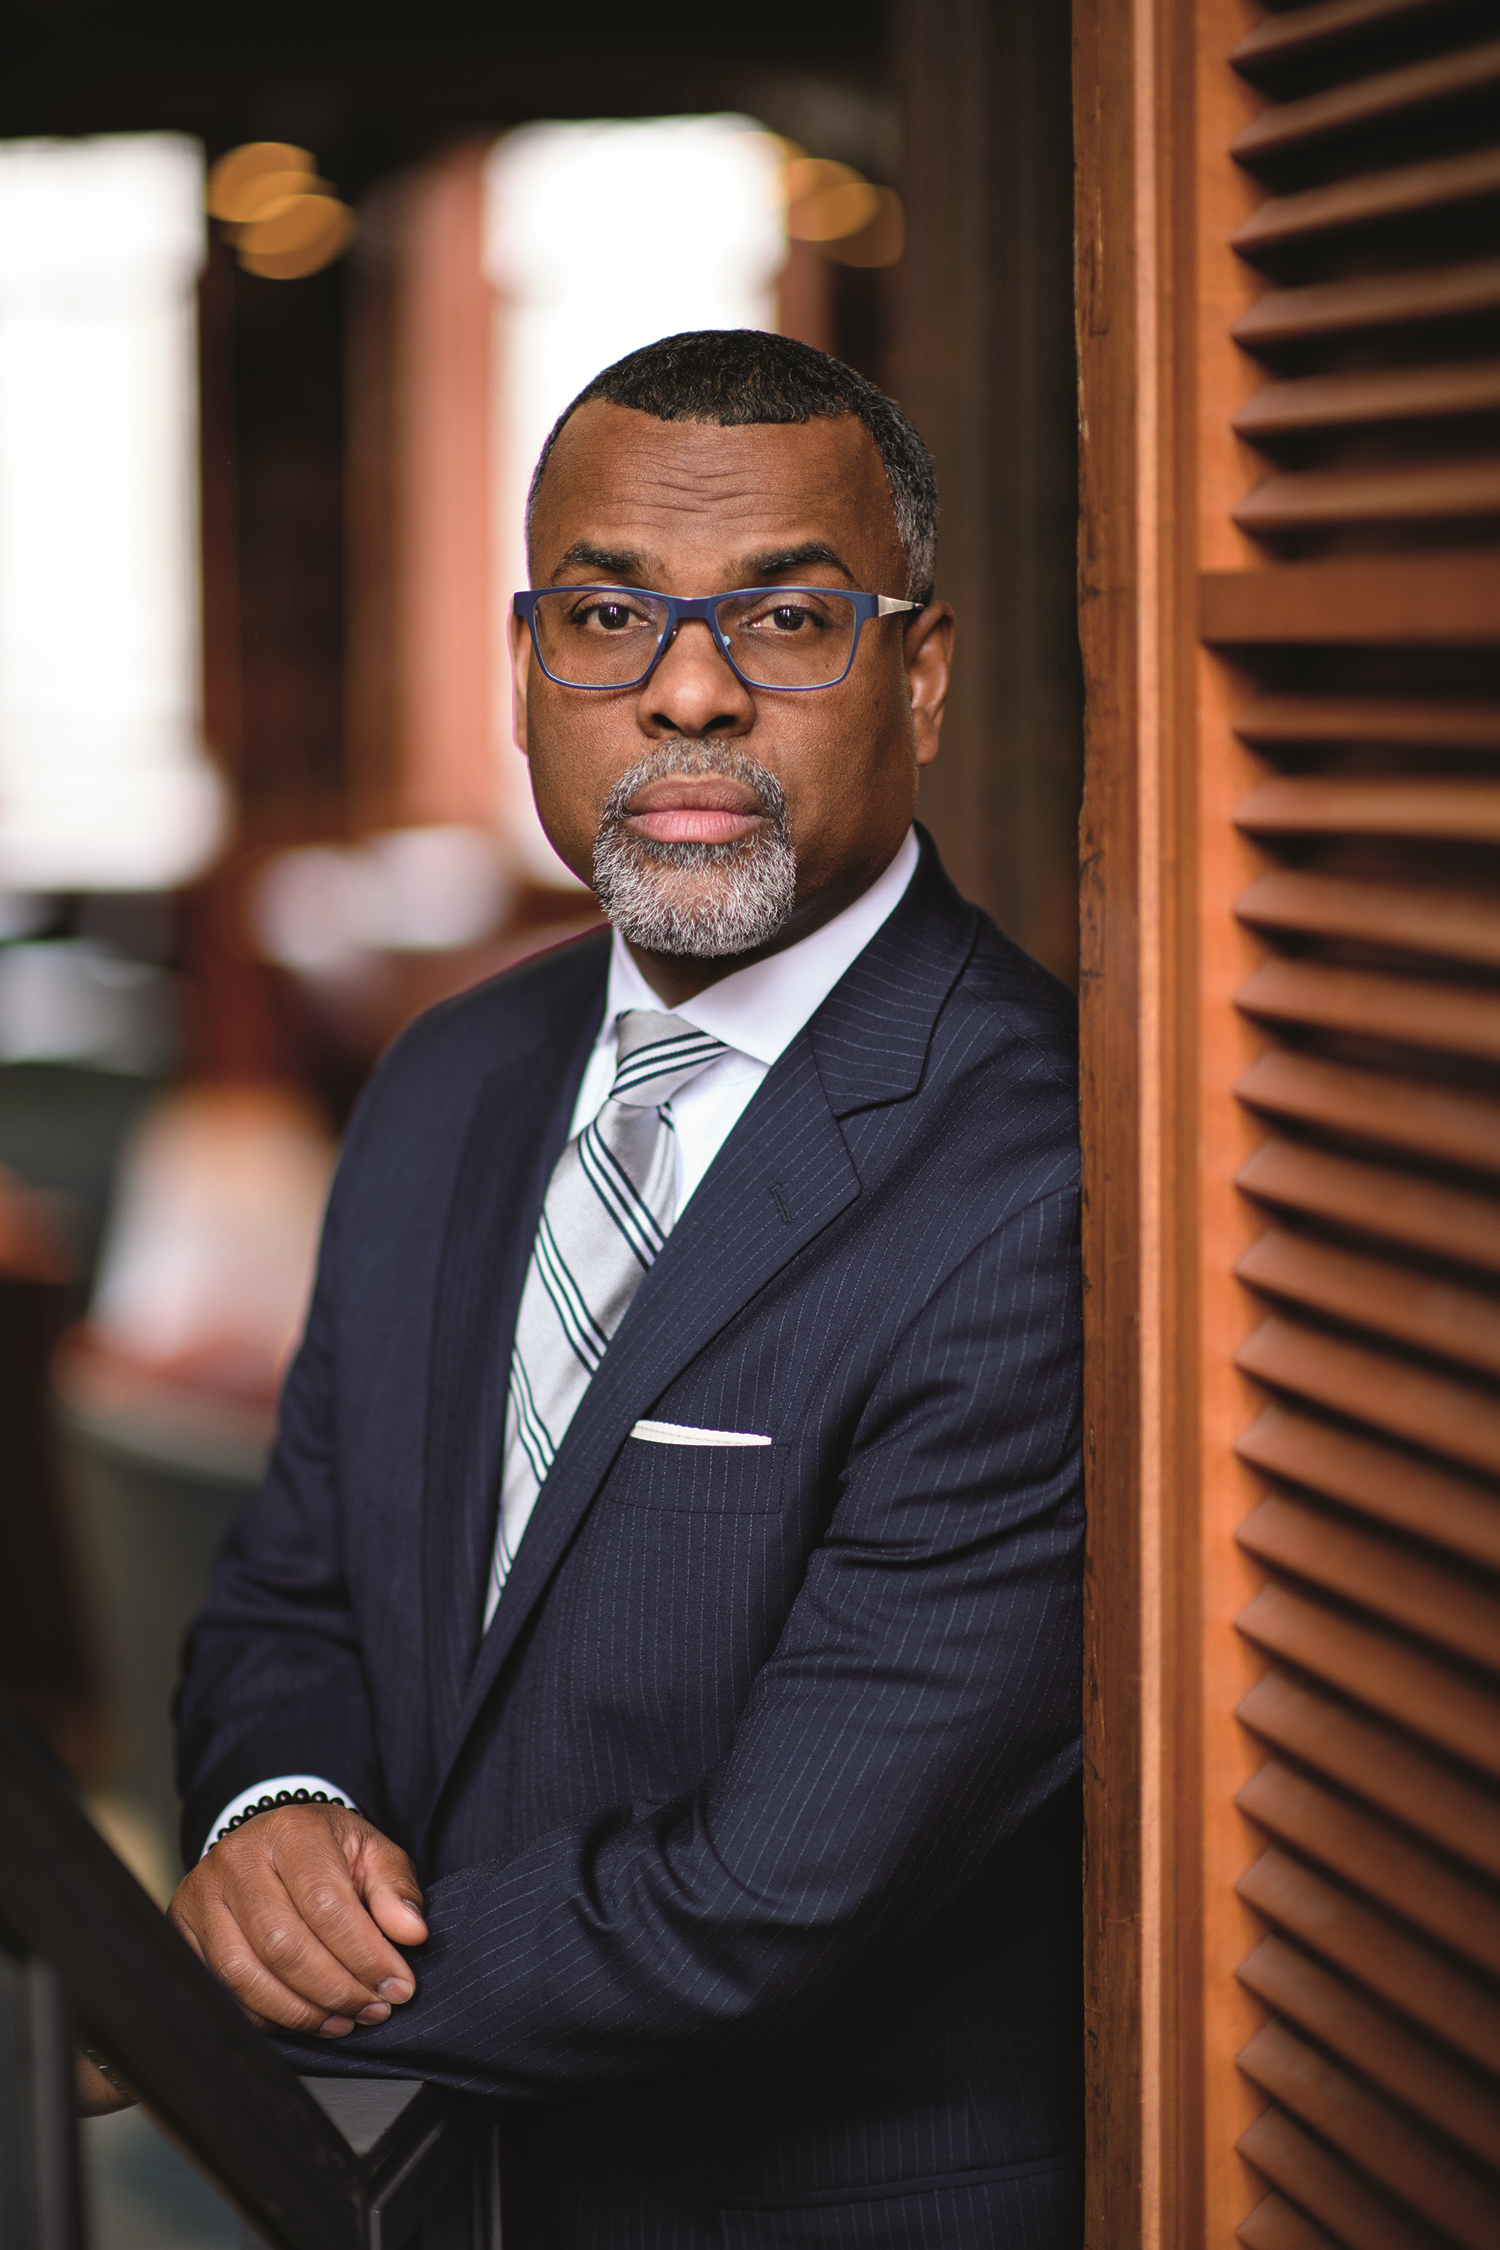 Rethinking how we approach leadership with Eddie S. Glaude Jr.